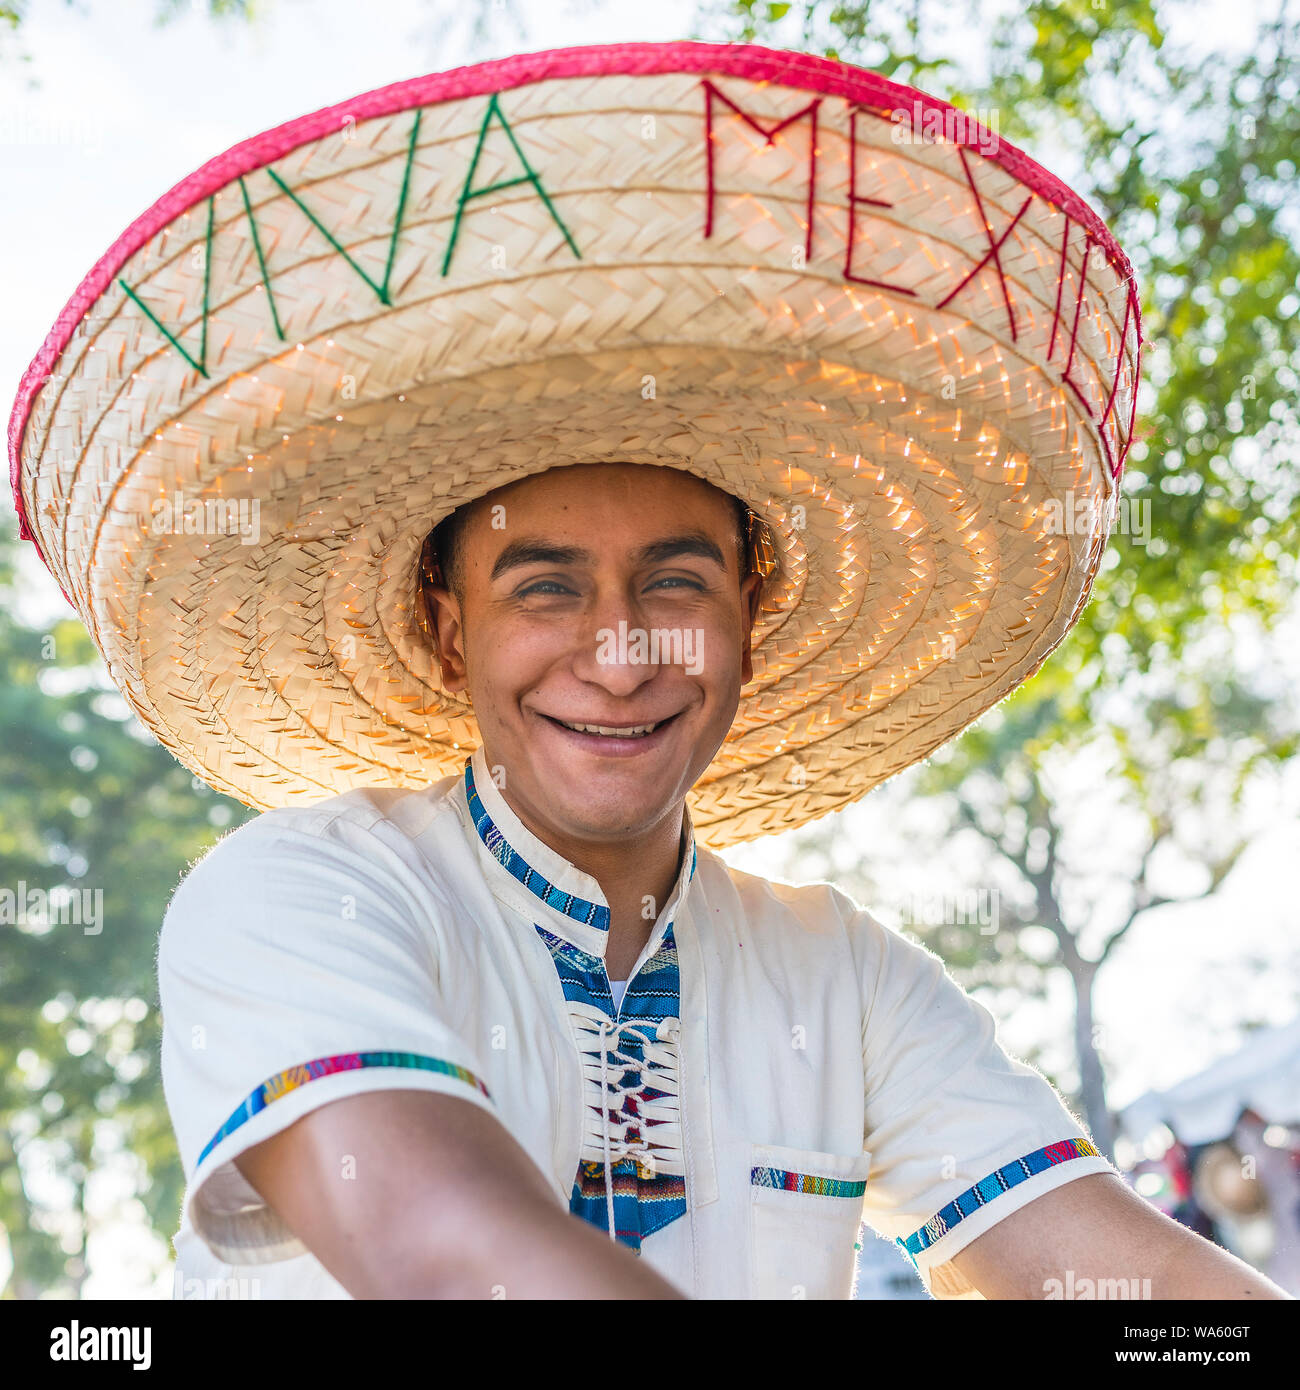 A 20 something HIspanic male wears and oversized straw sombrero hat with 'Viva Mexico' stitched on it in yarn and smiles while facing forward. Stock Photo